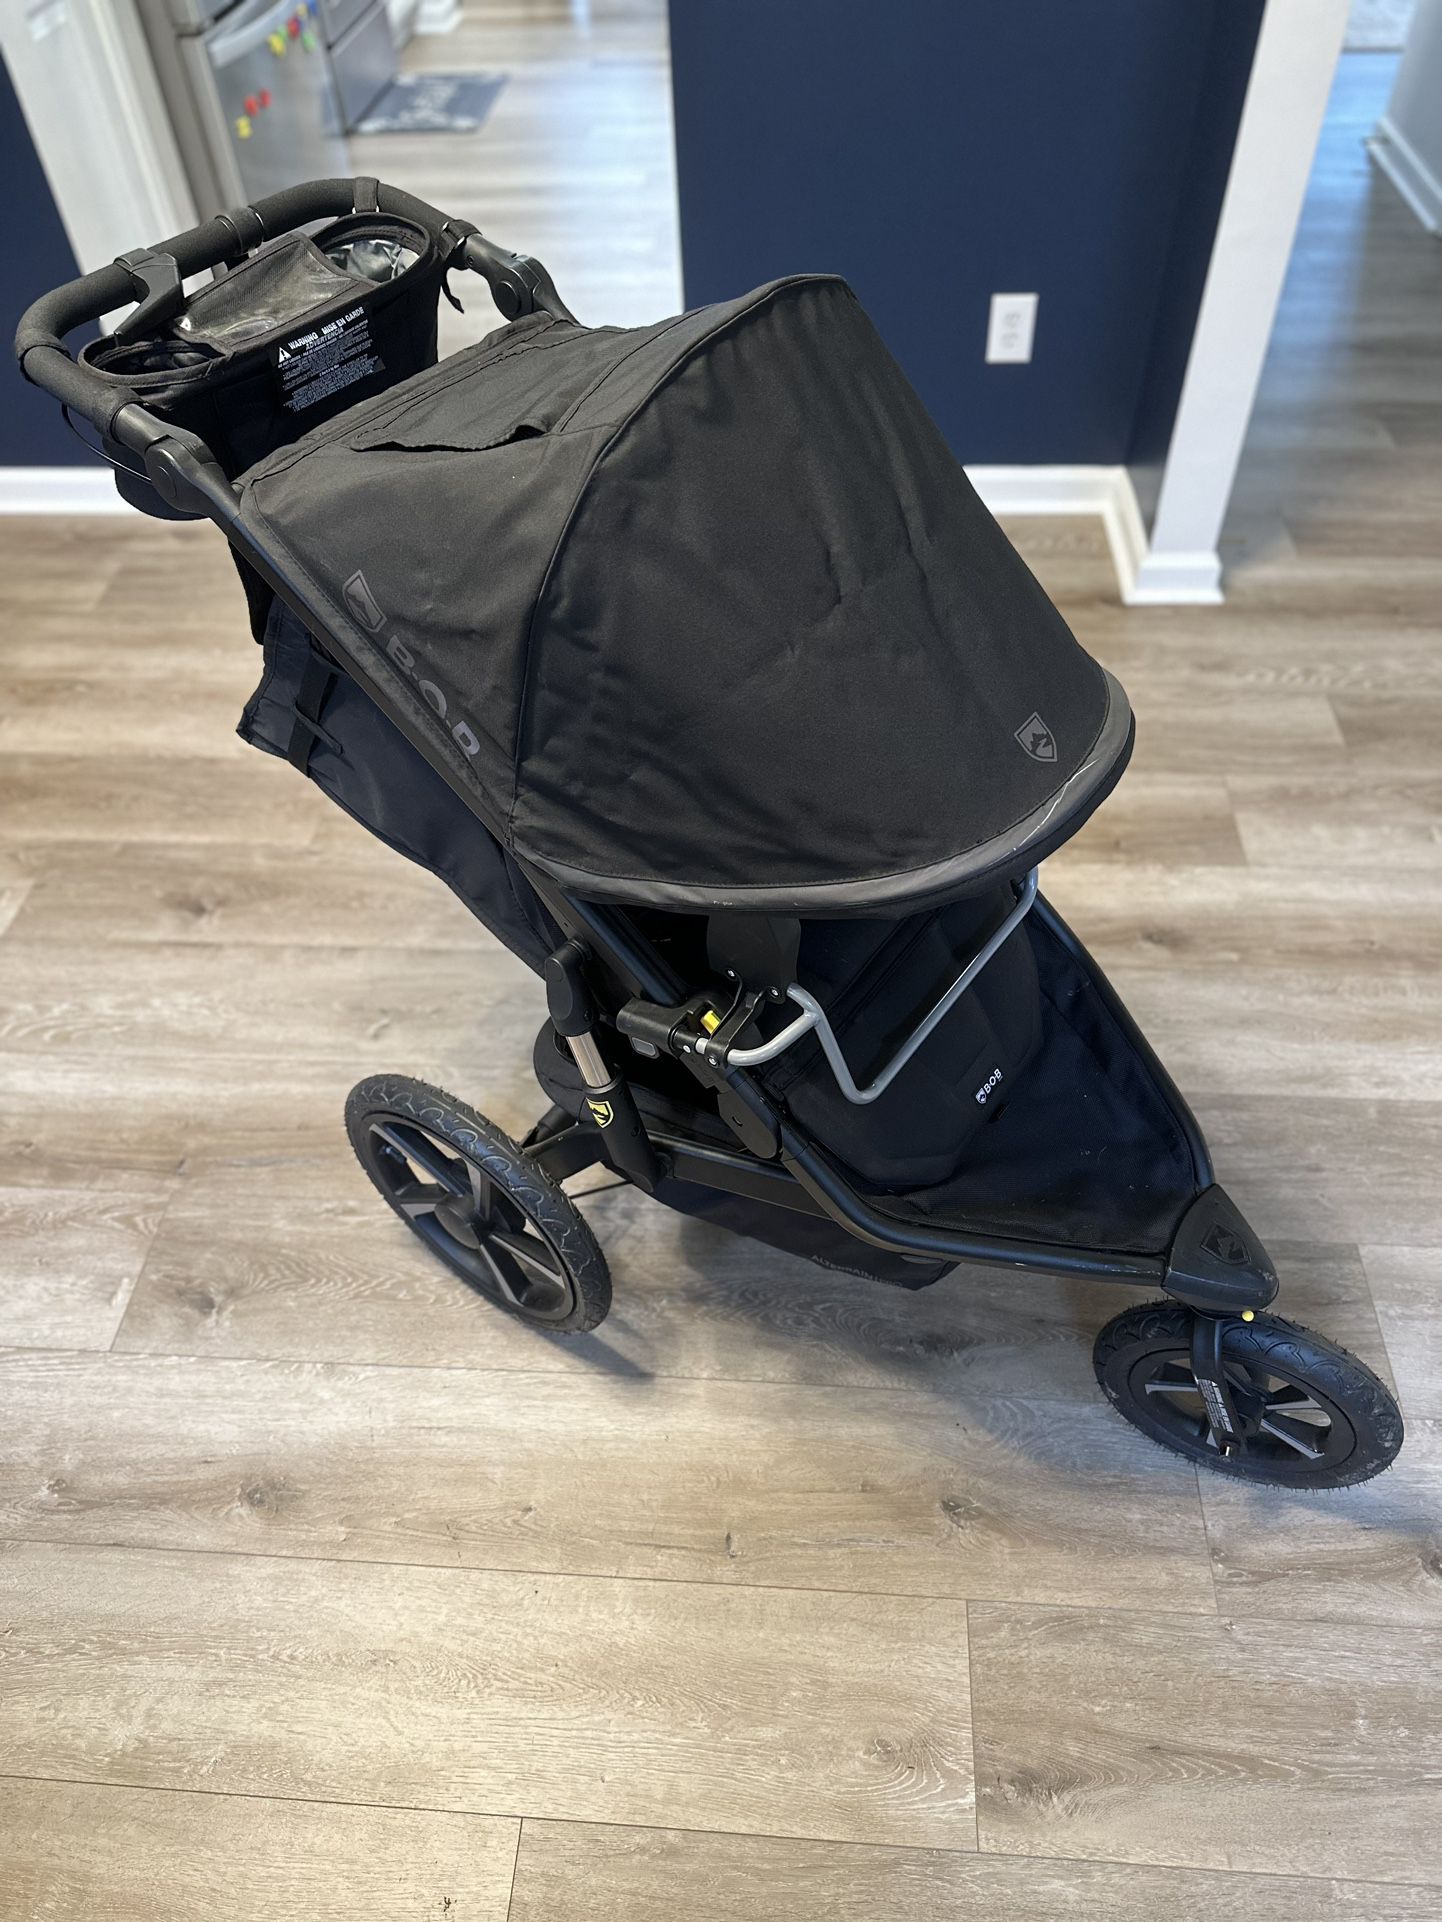 idiom skrive overalt Bob Stroller All Terrain Pro and Accessories For Sale! for Sale in Mauldin,  SC - OfferUp